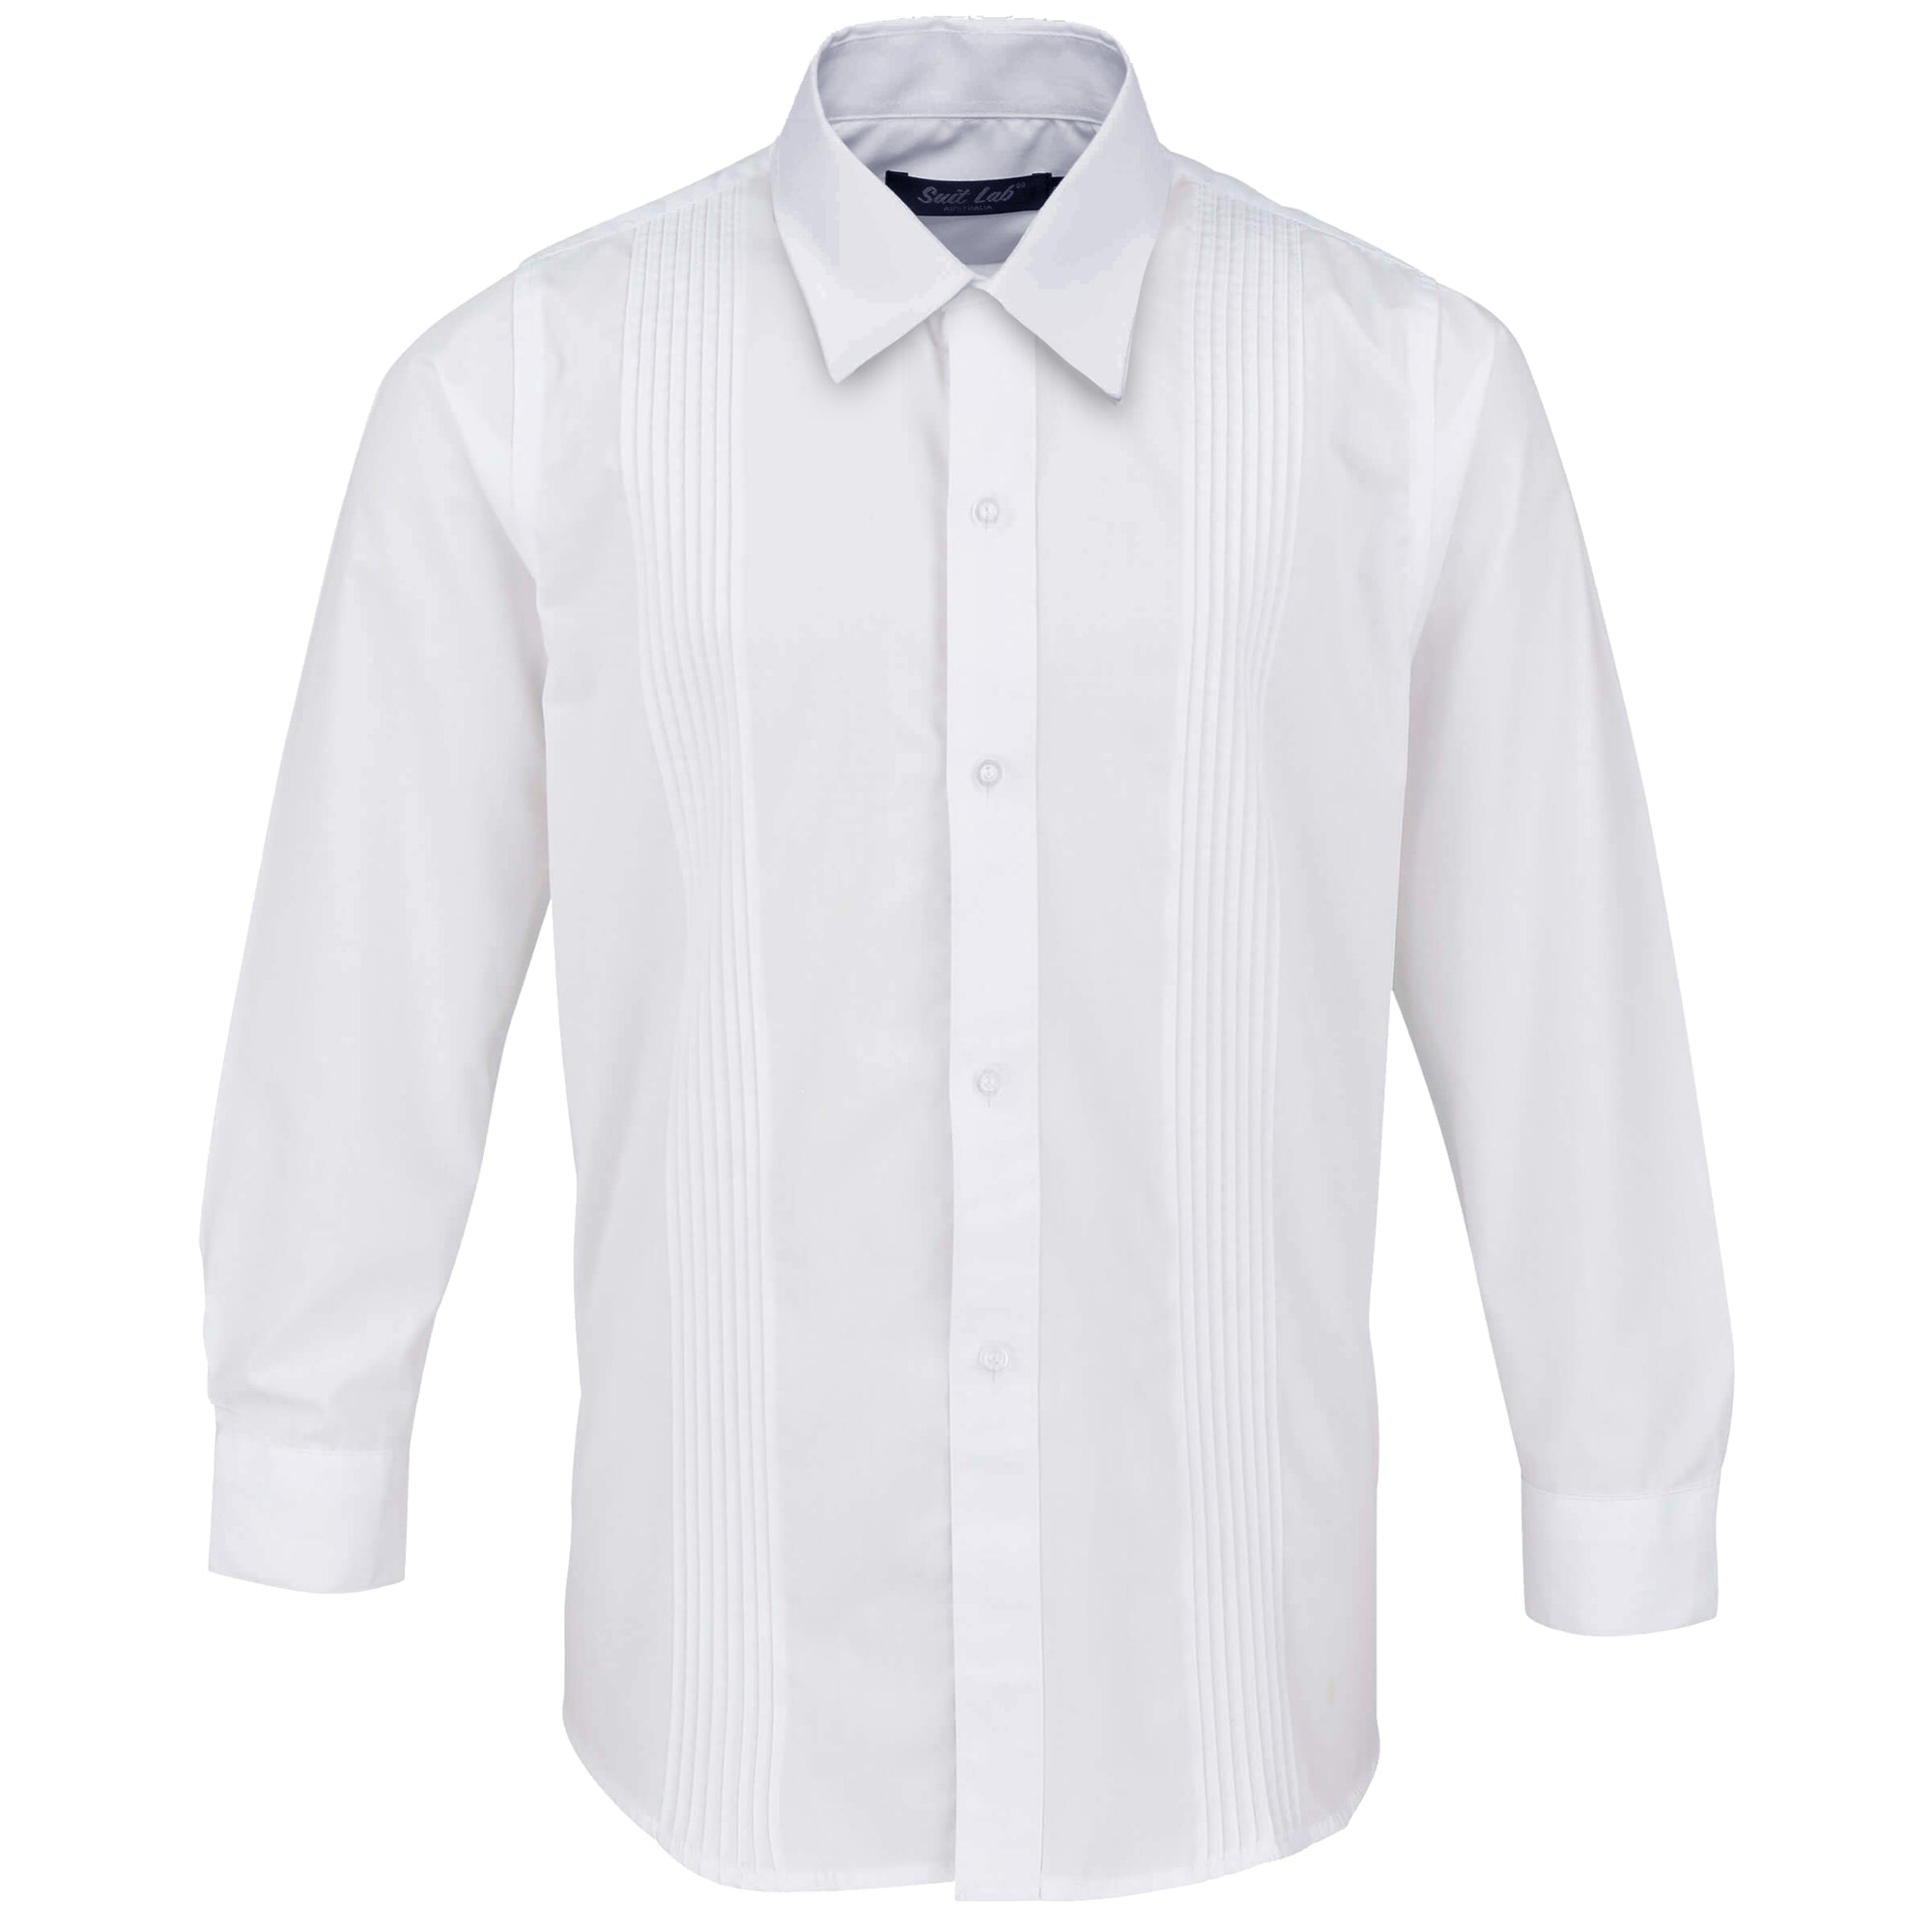 Boys White Formal Shirt with Pleat Detail